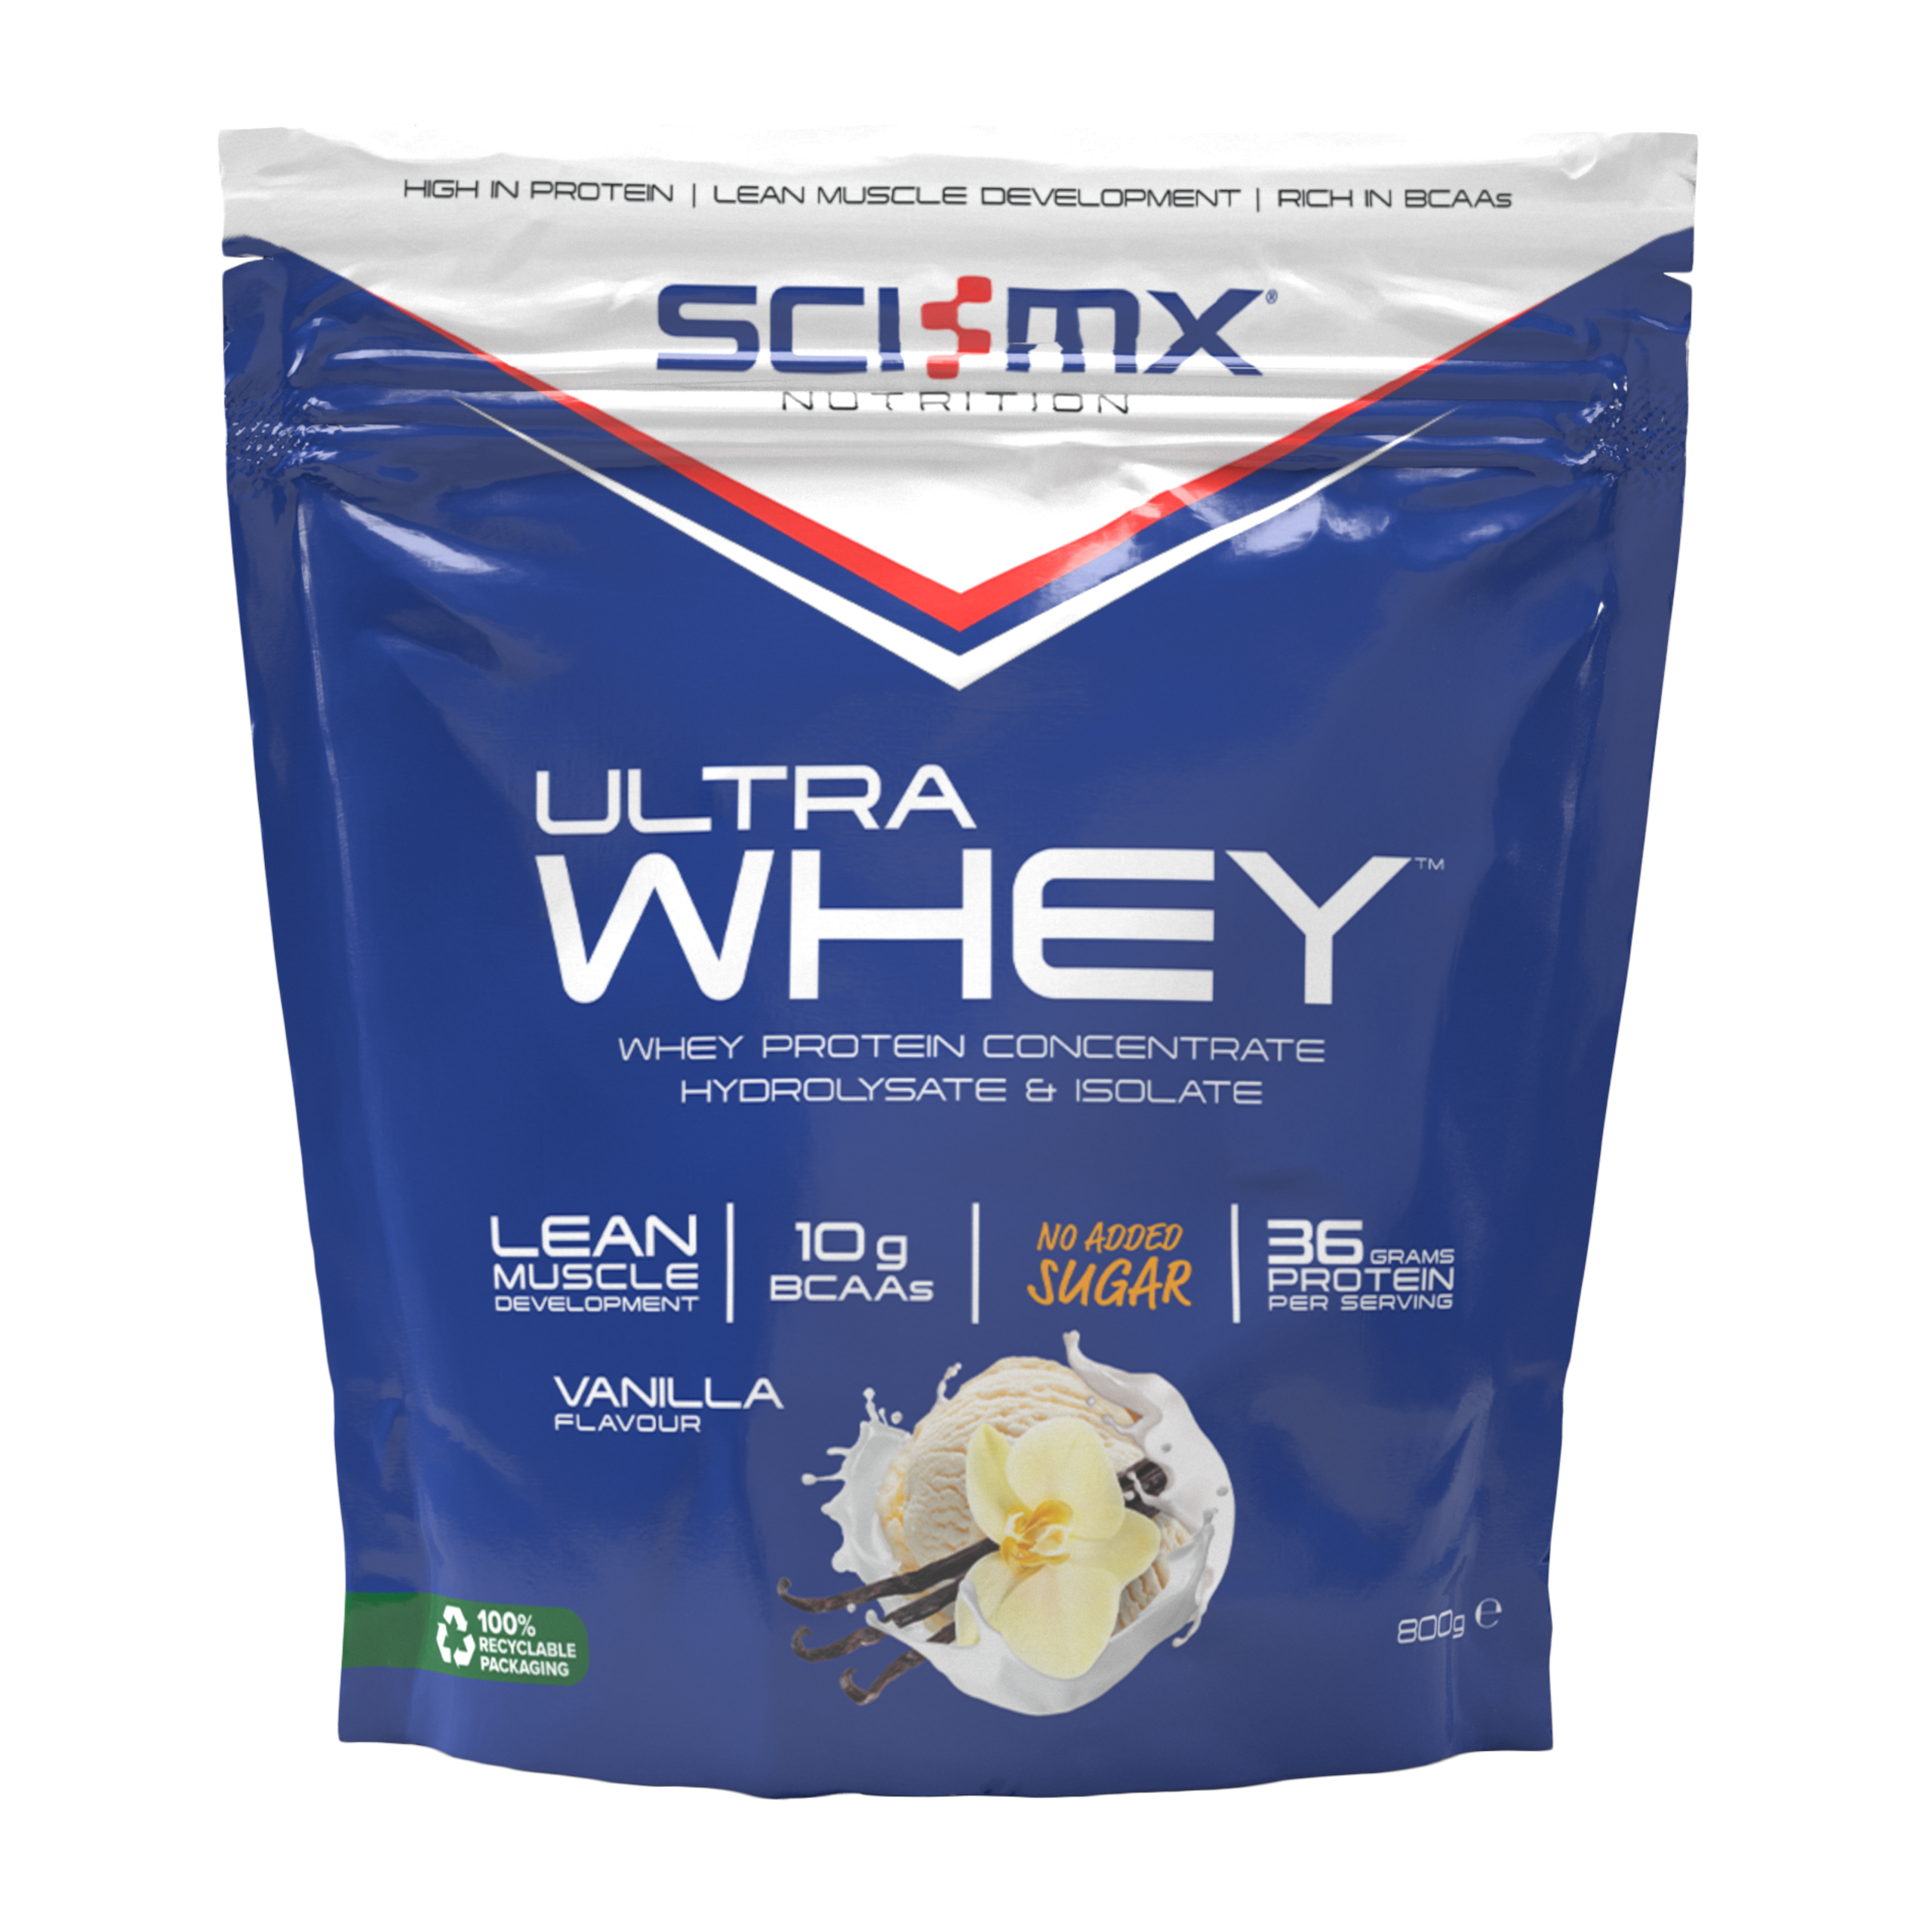 ULTRA WHEY™ PROTEIN